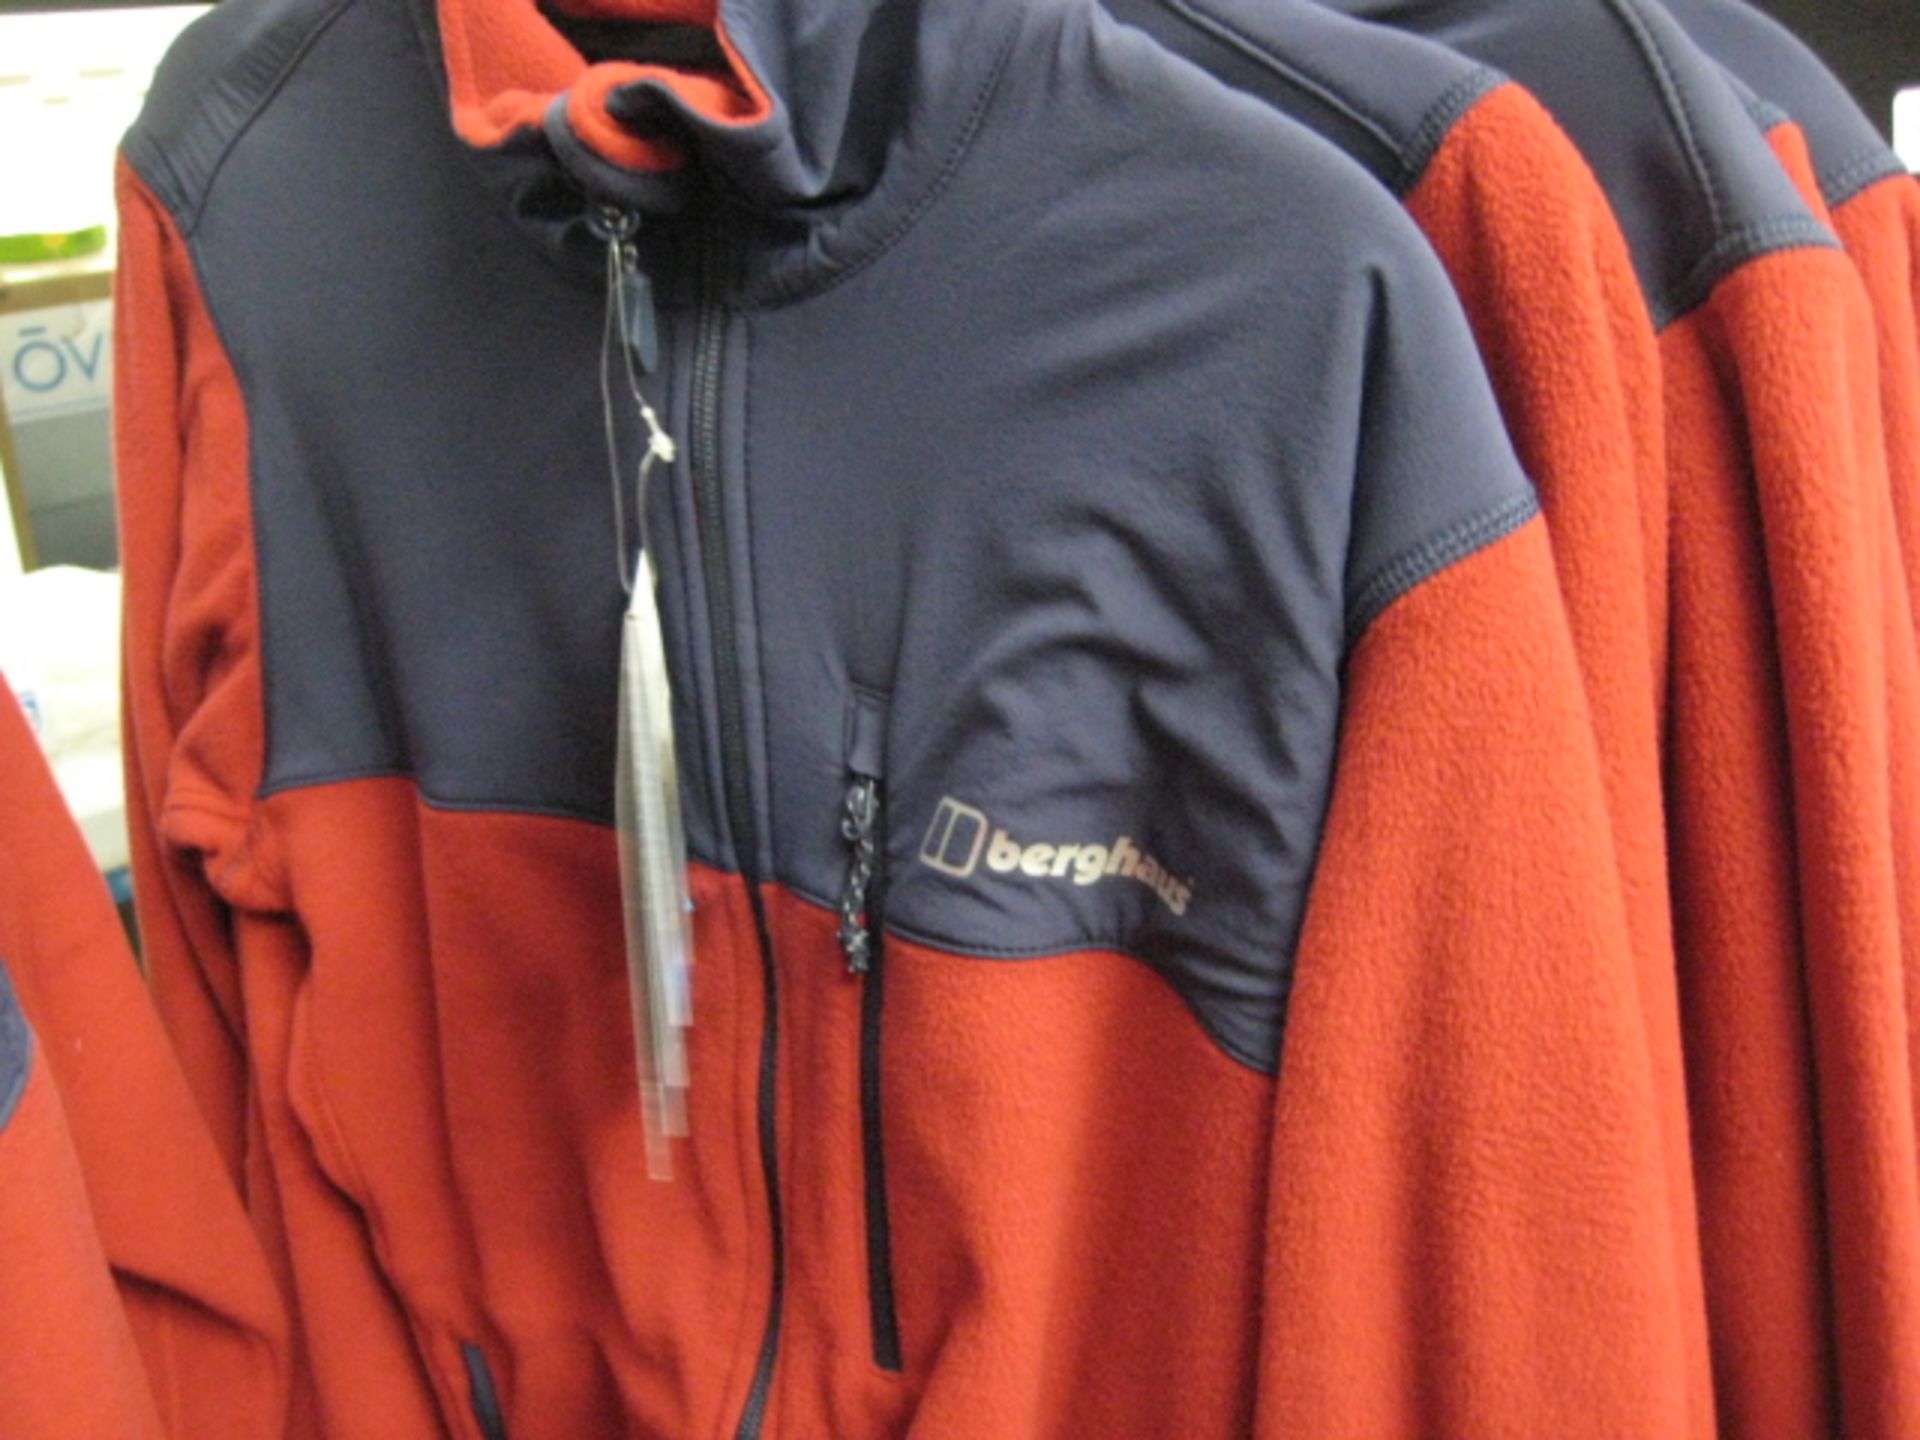 Berghaus zip up fleece in blue and red